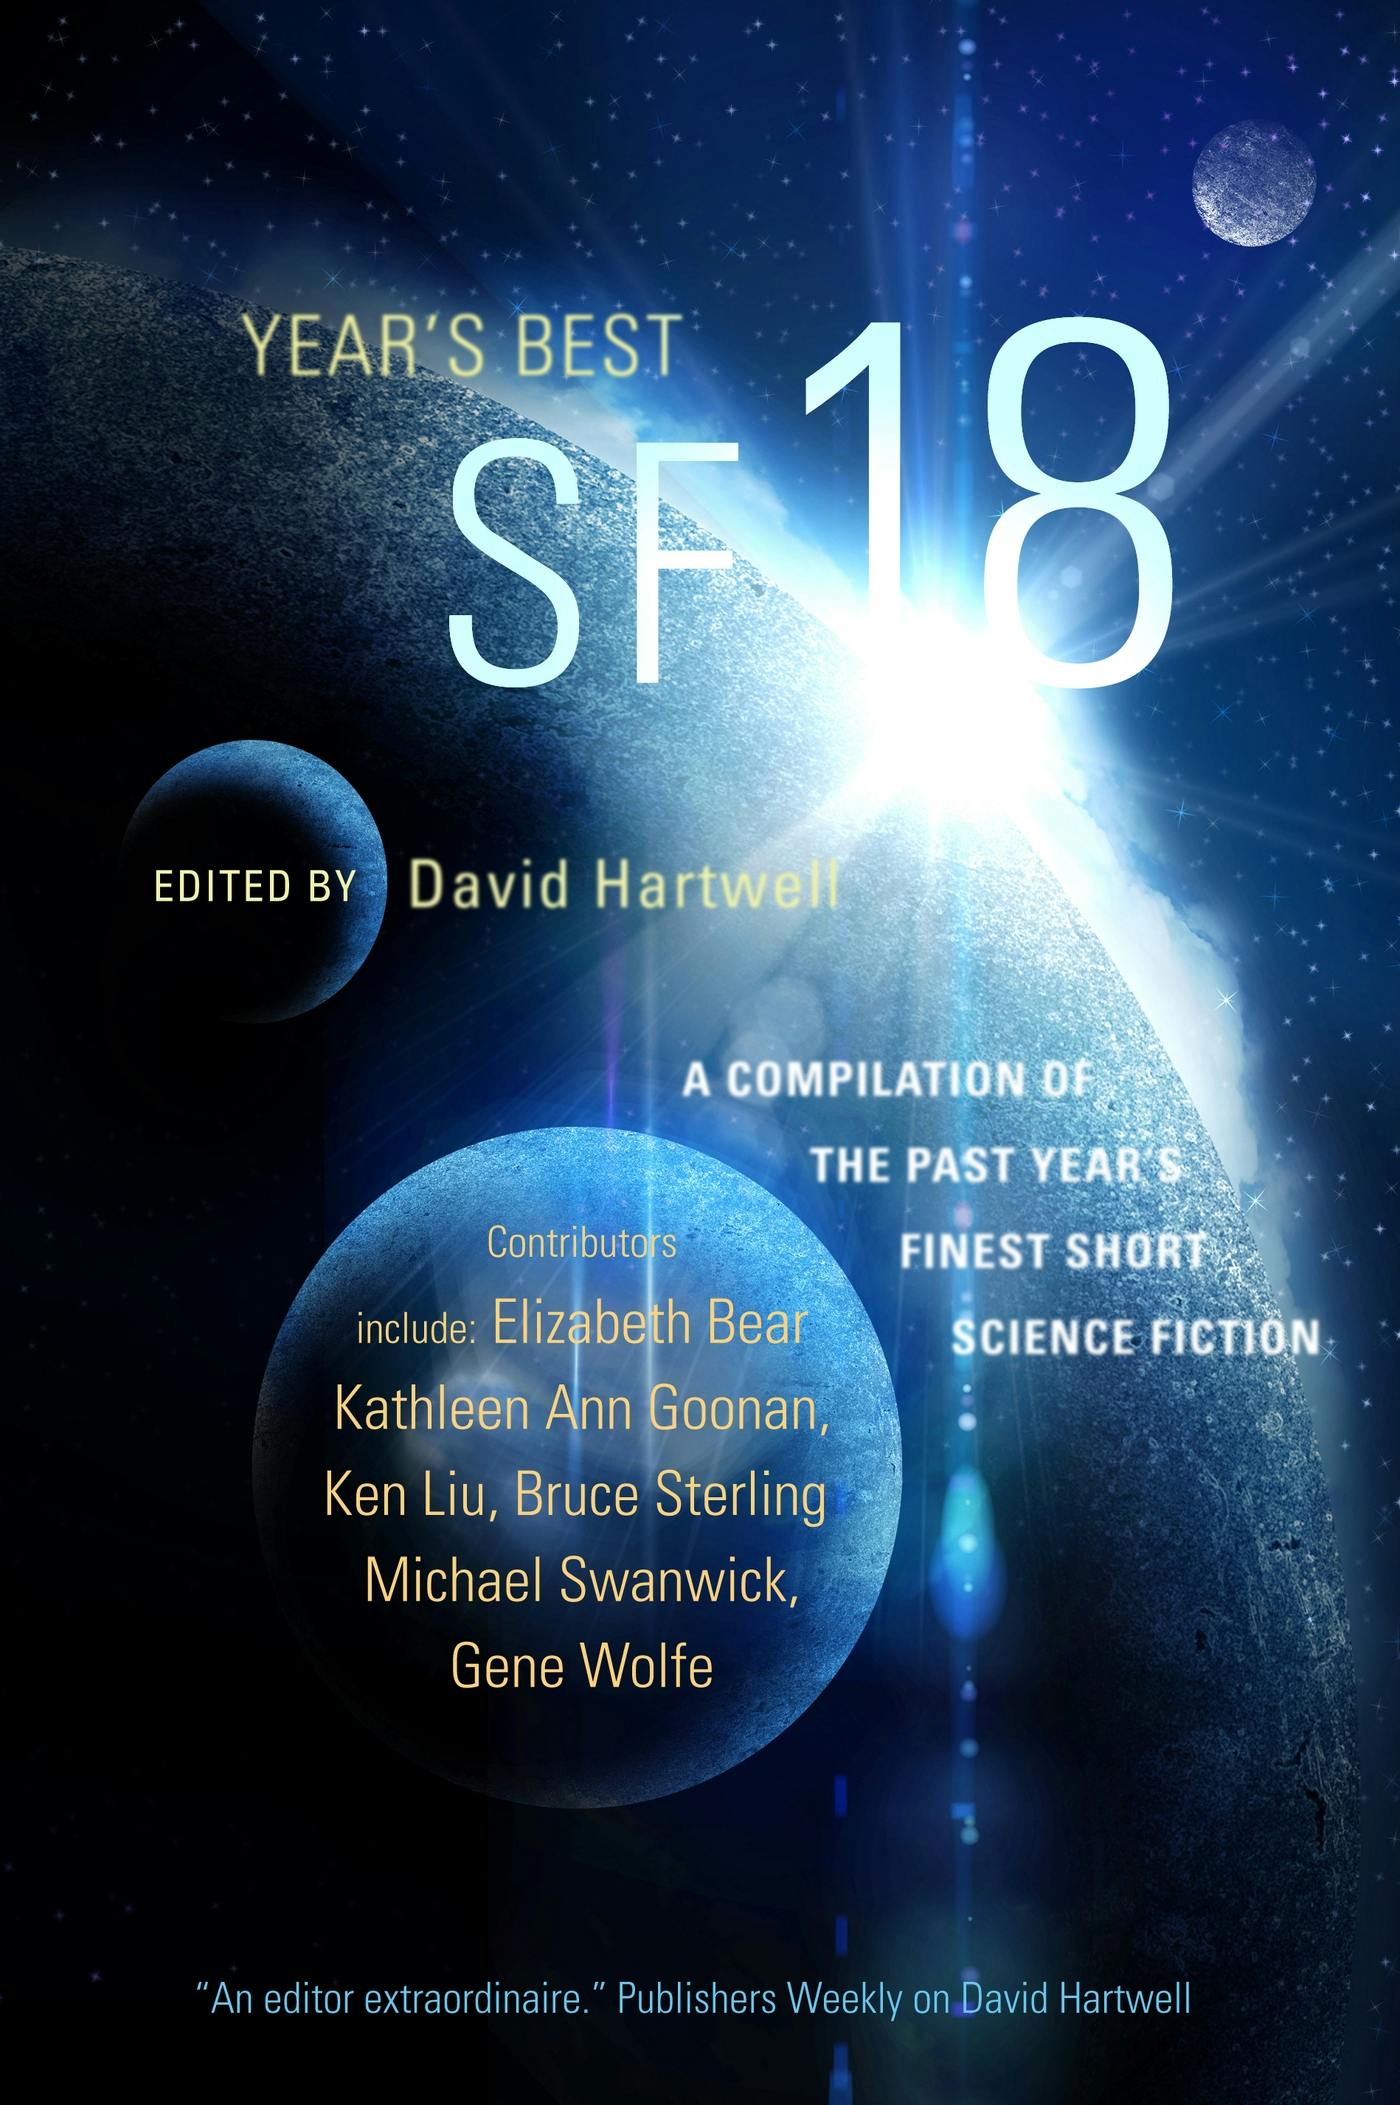 Cover for the book titled as: Year's Best SF 18